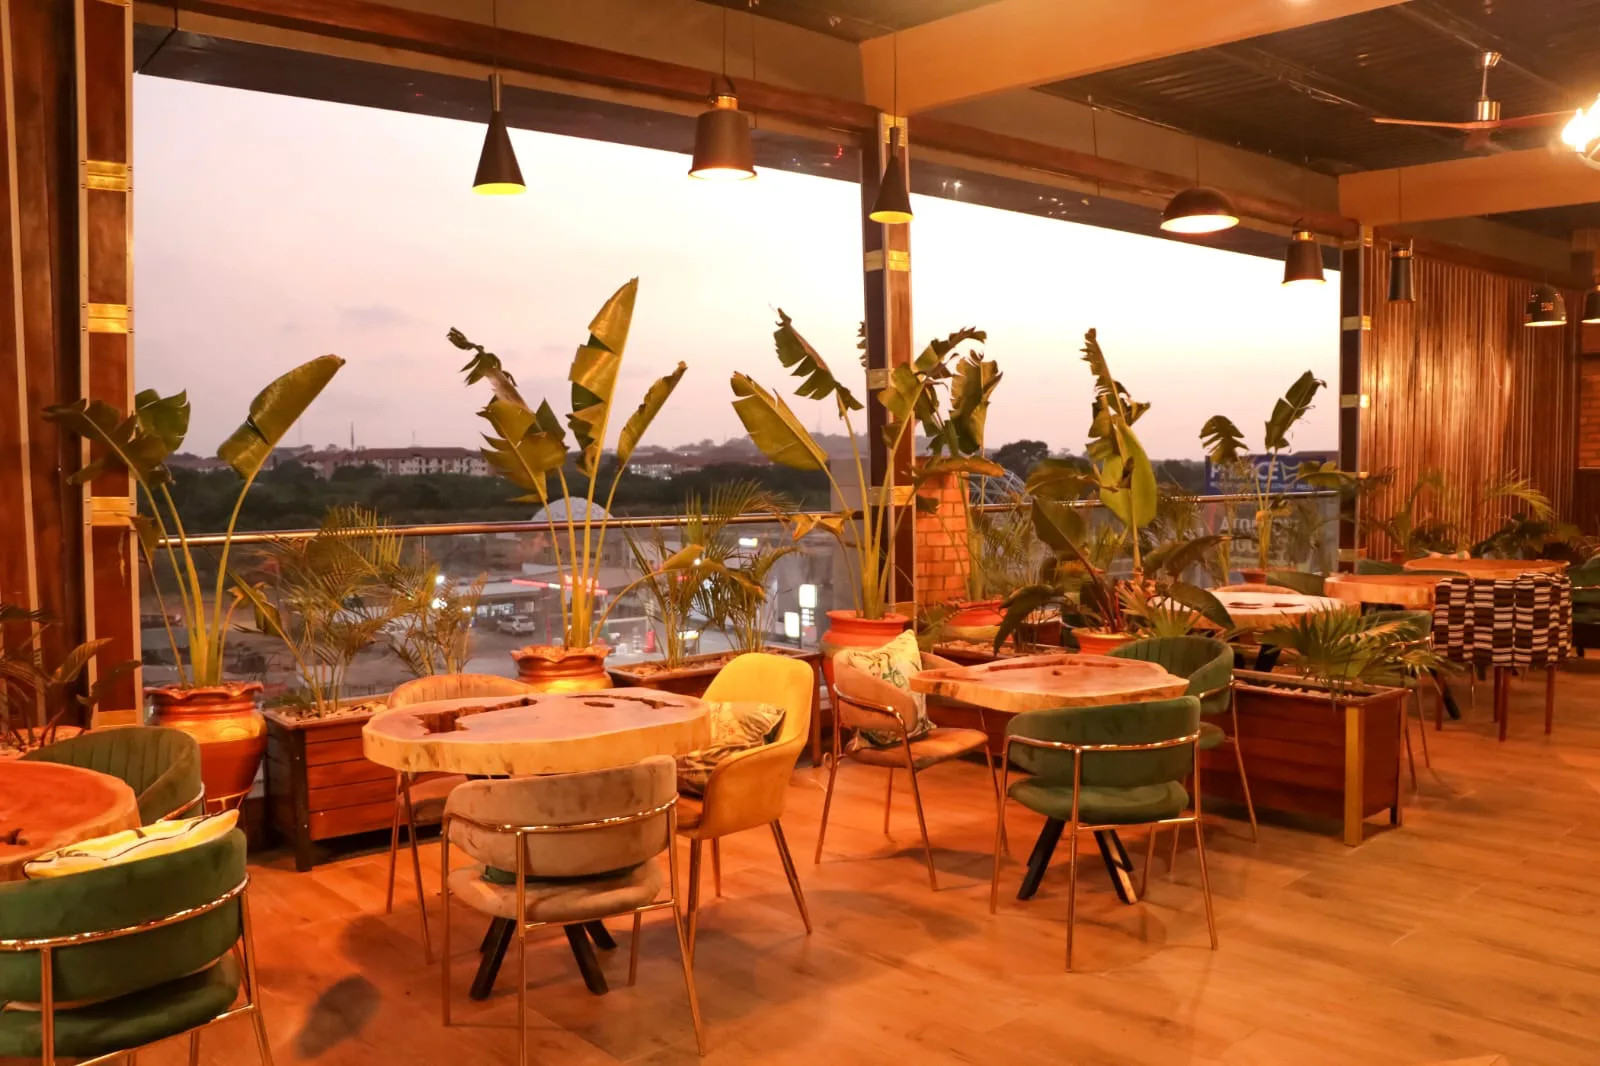 Club smooth atlantic bar, the best rooftop bars in Accra 